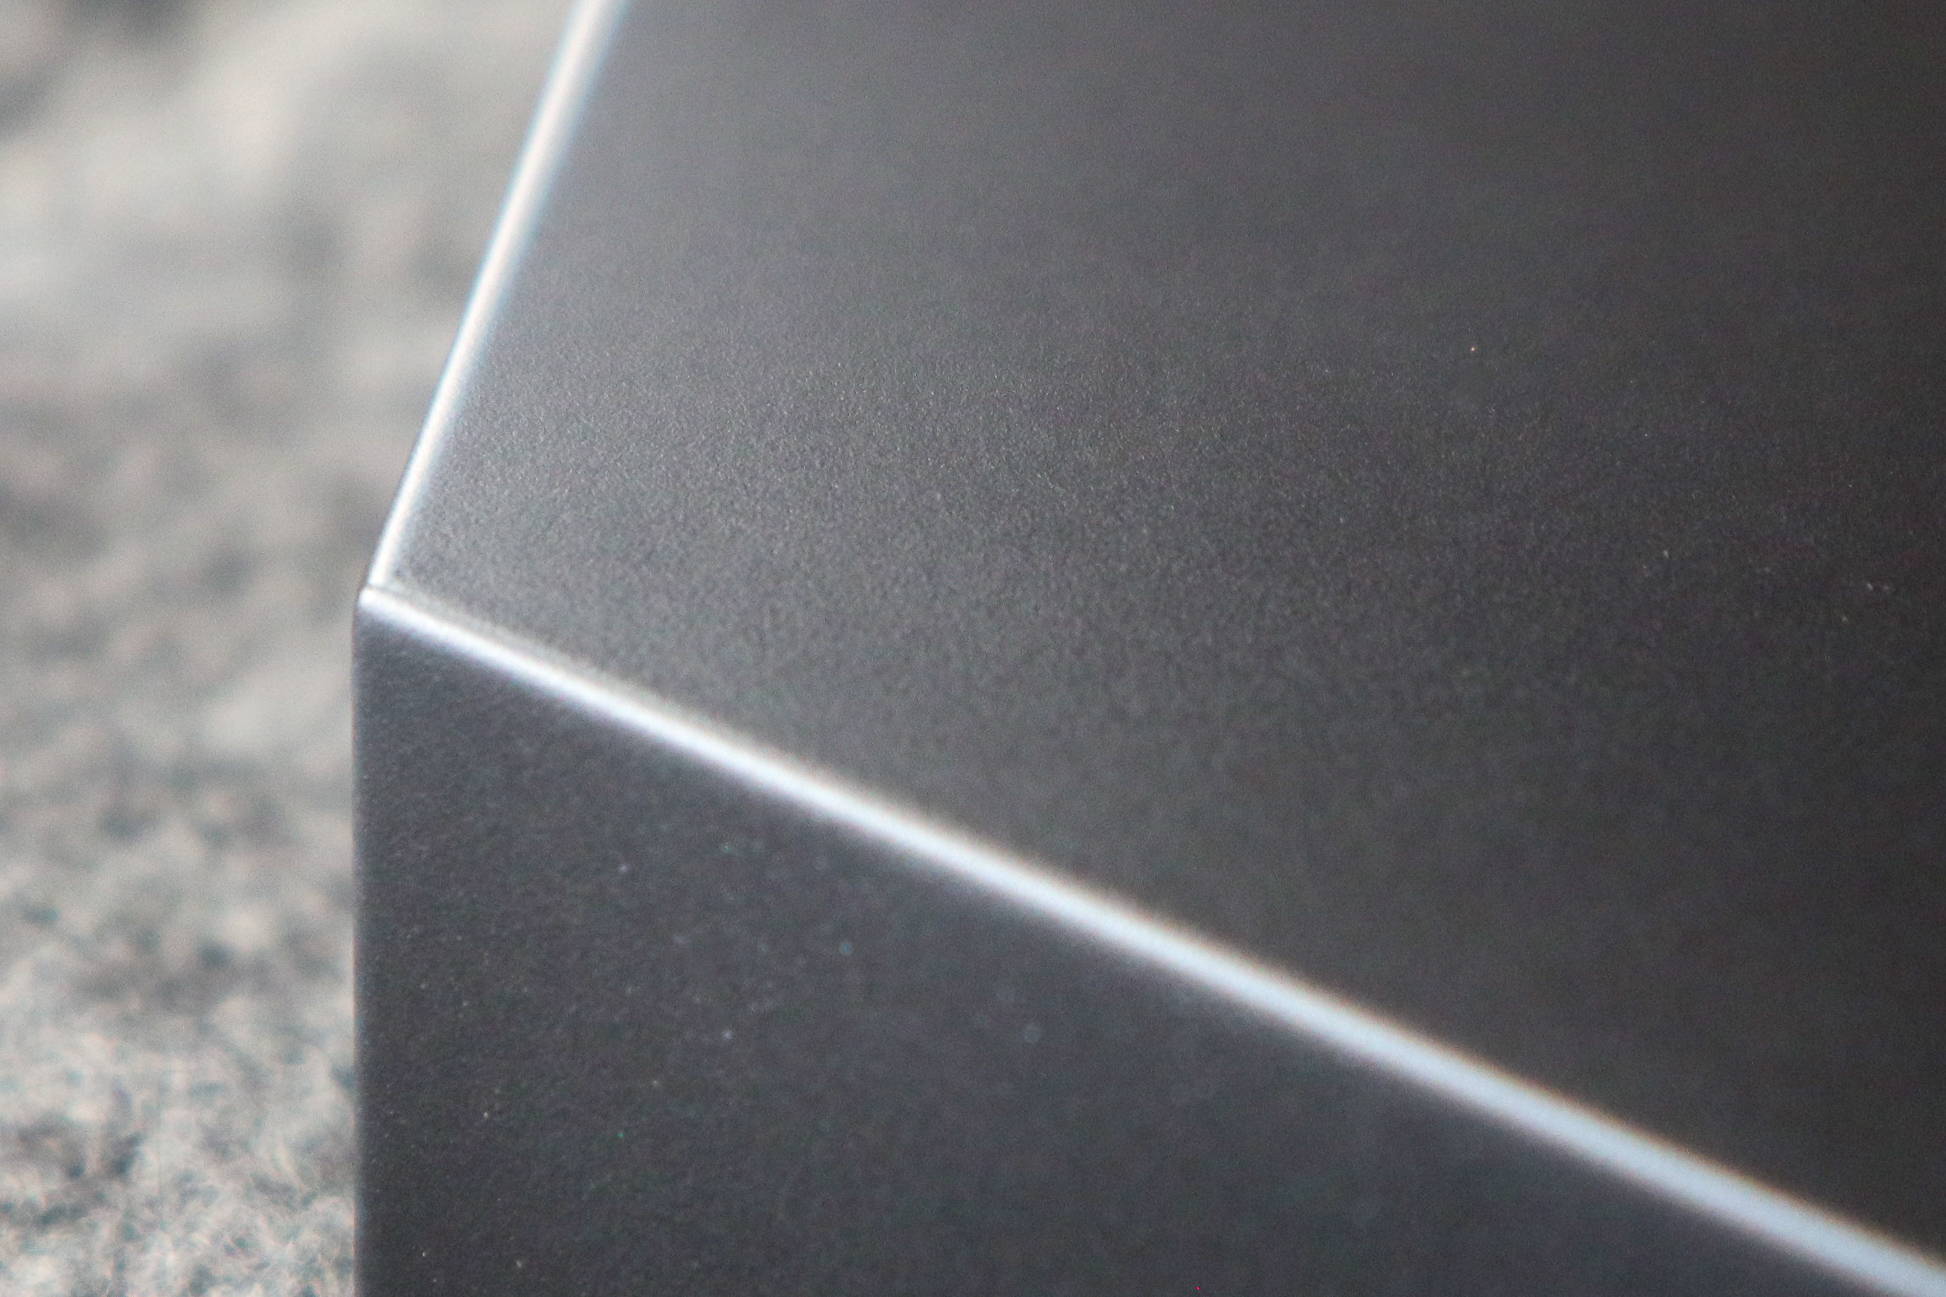 Very close up photo of the matte black base edge and side